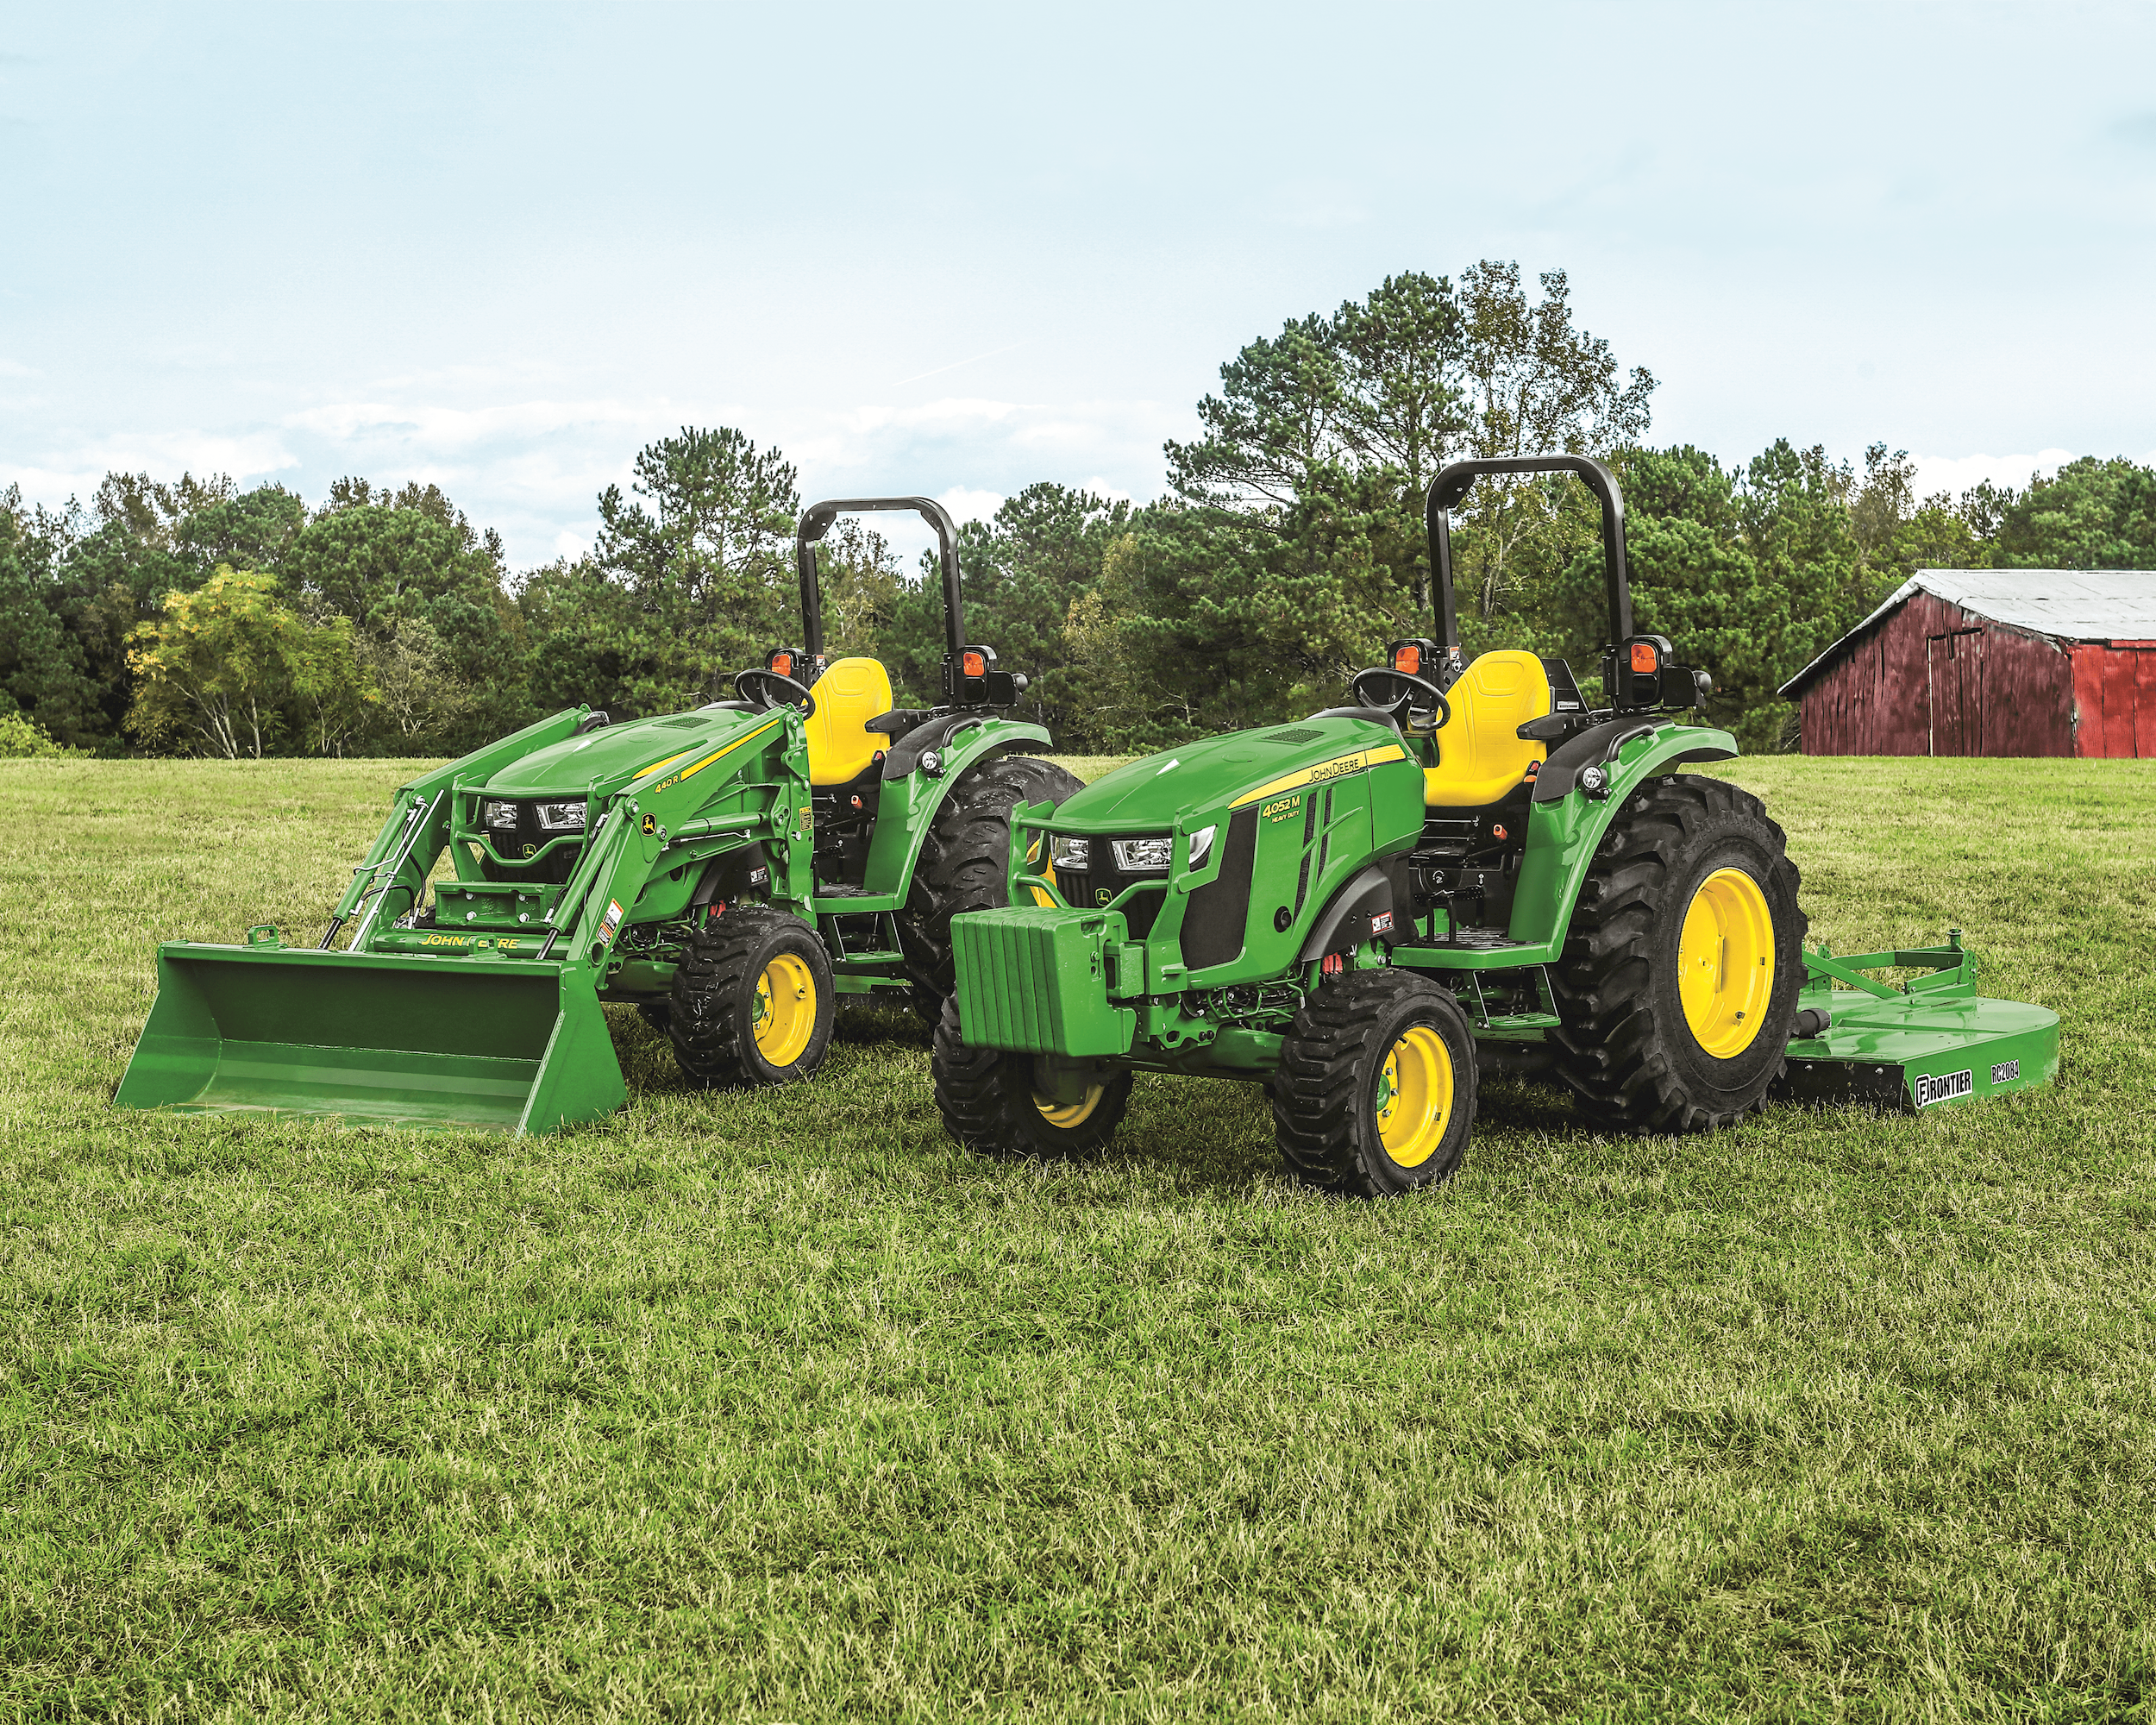 Pros and Cons of Using Tractors Blue Book